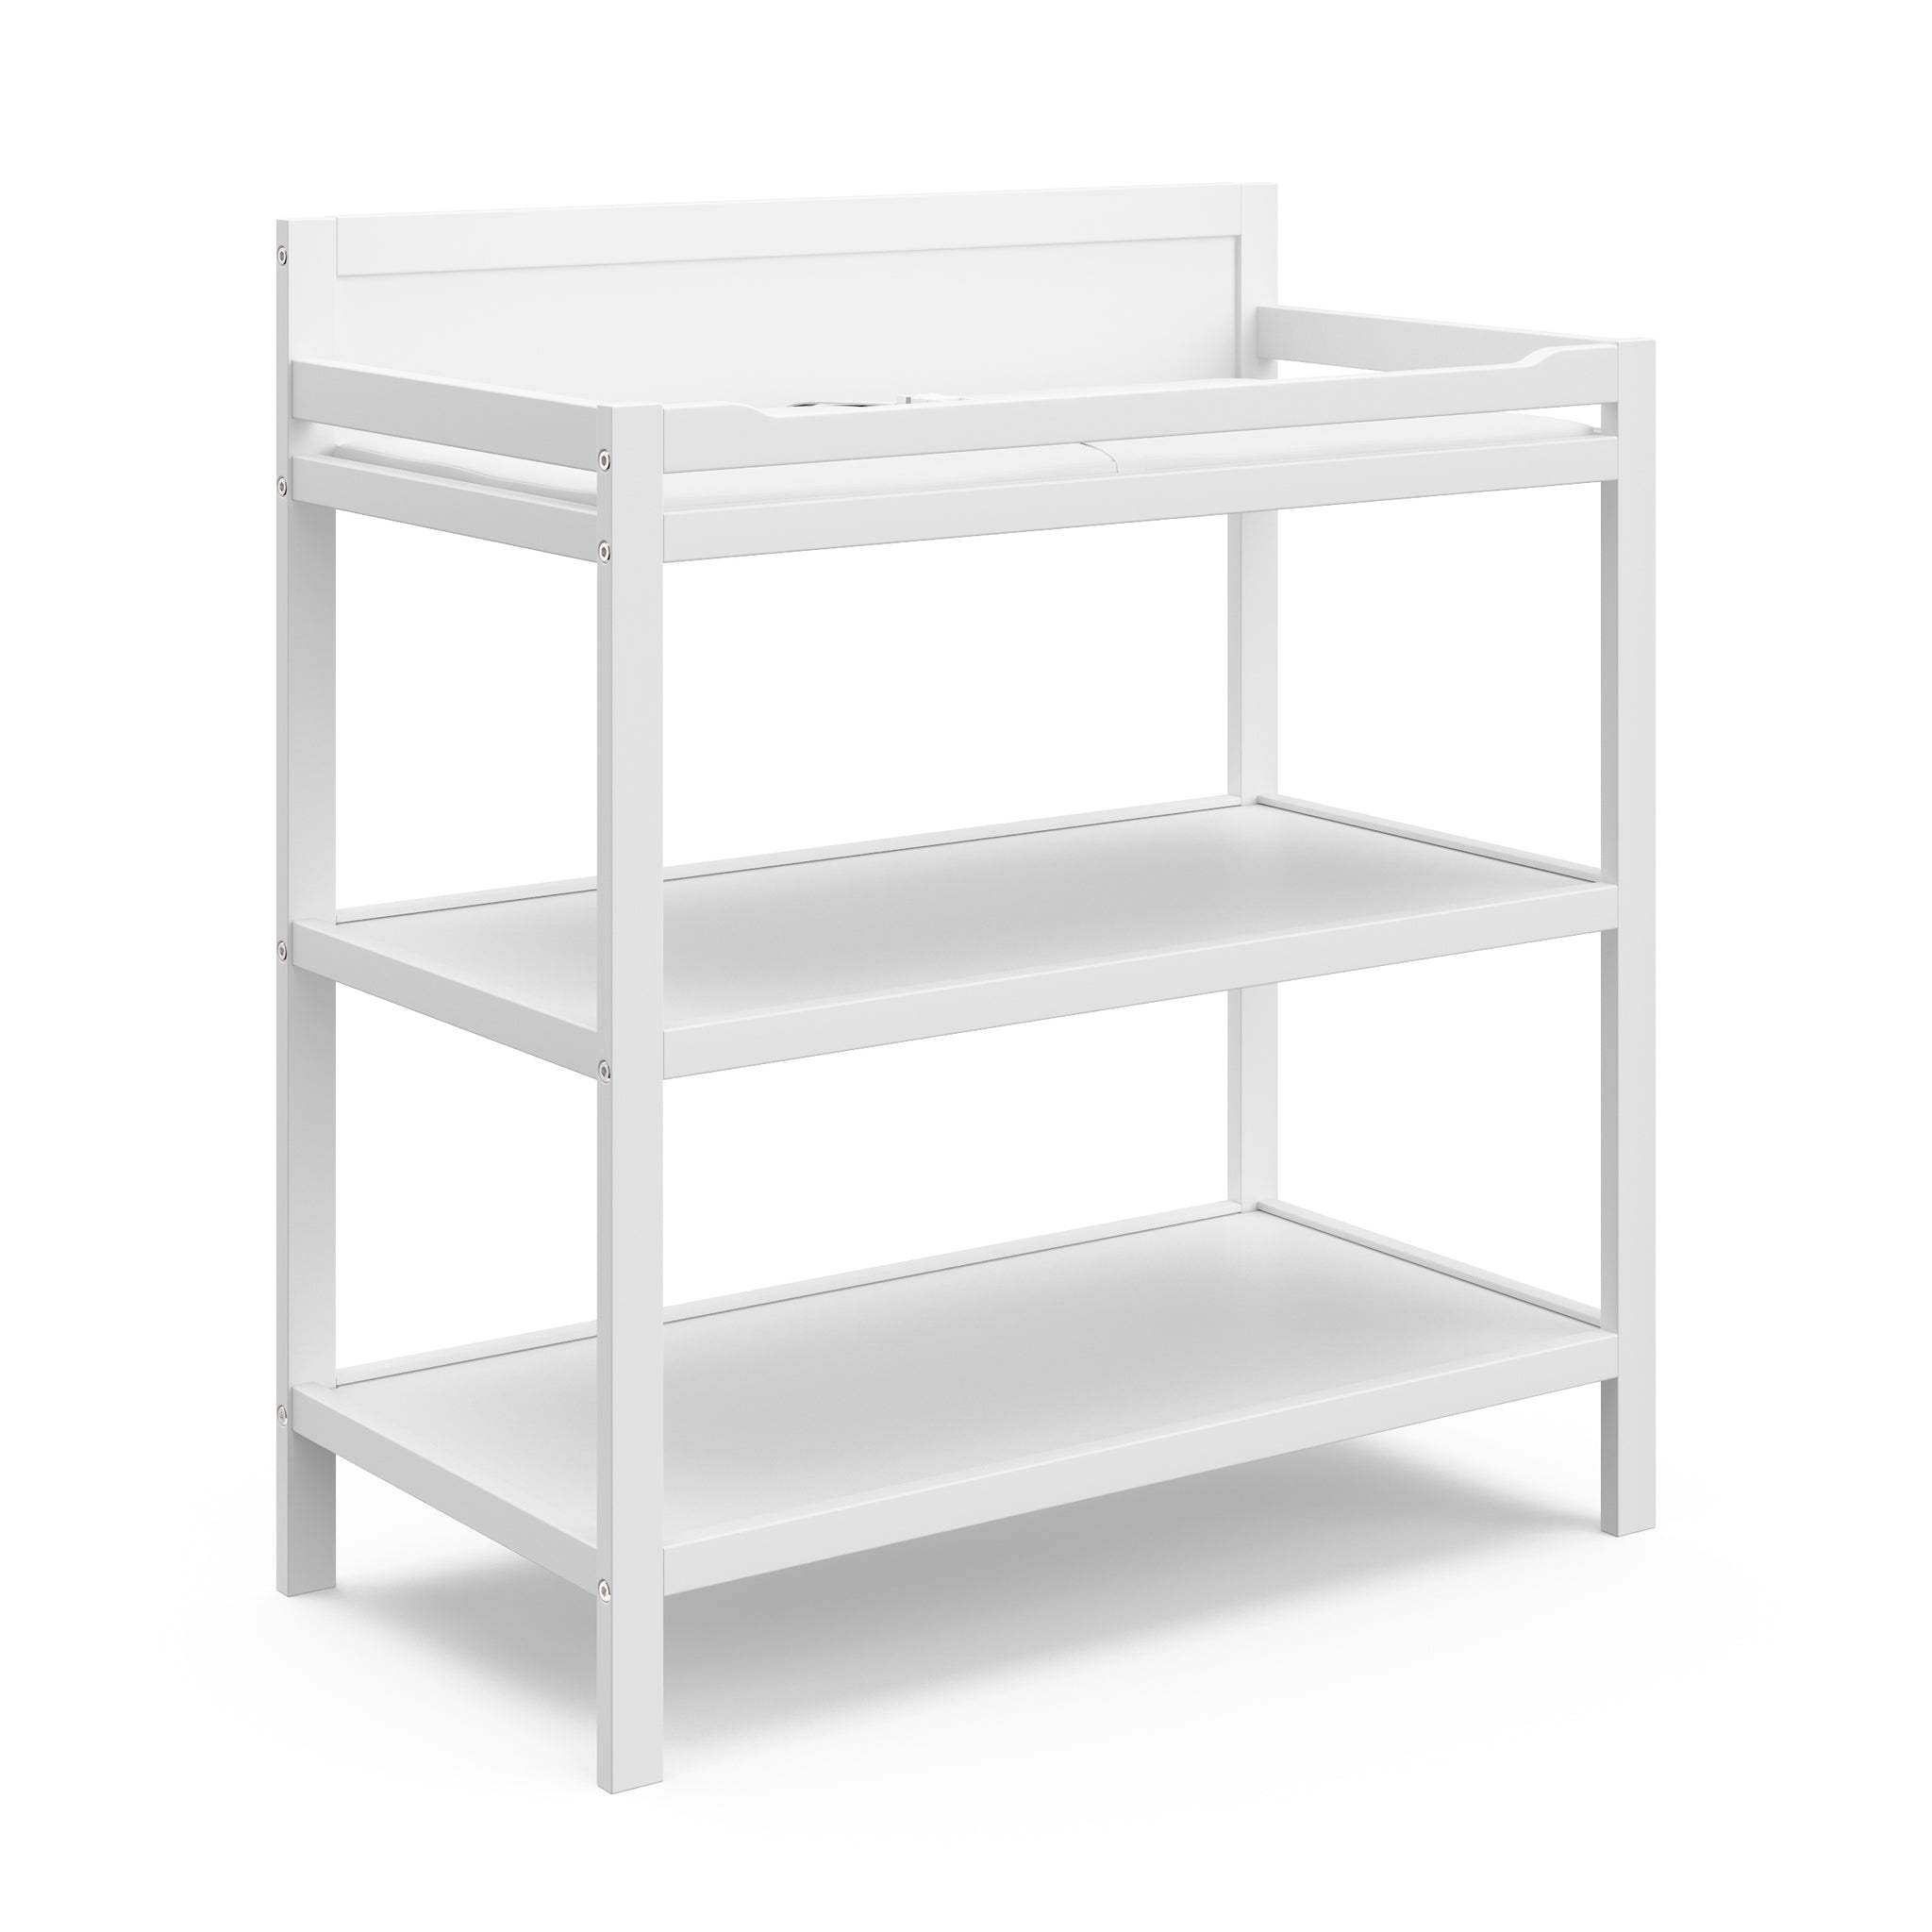 White angled changing table with storage